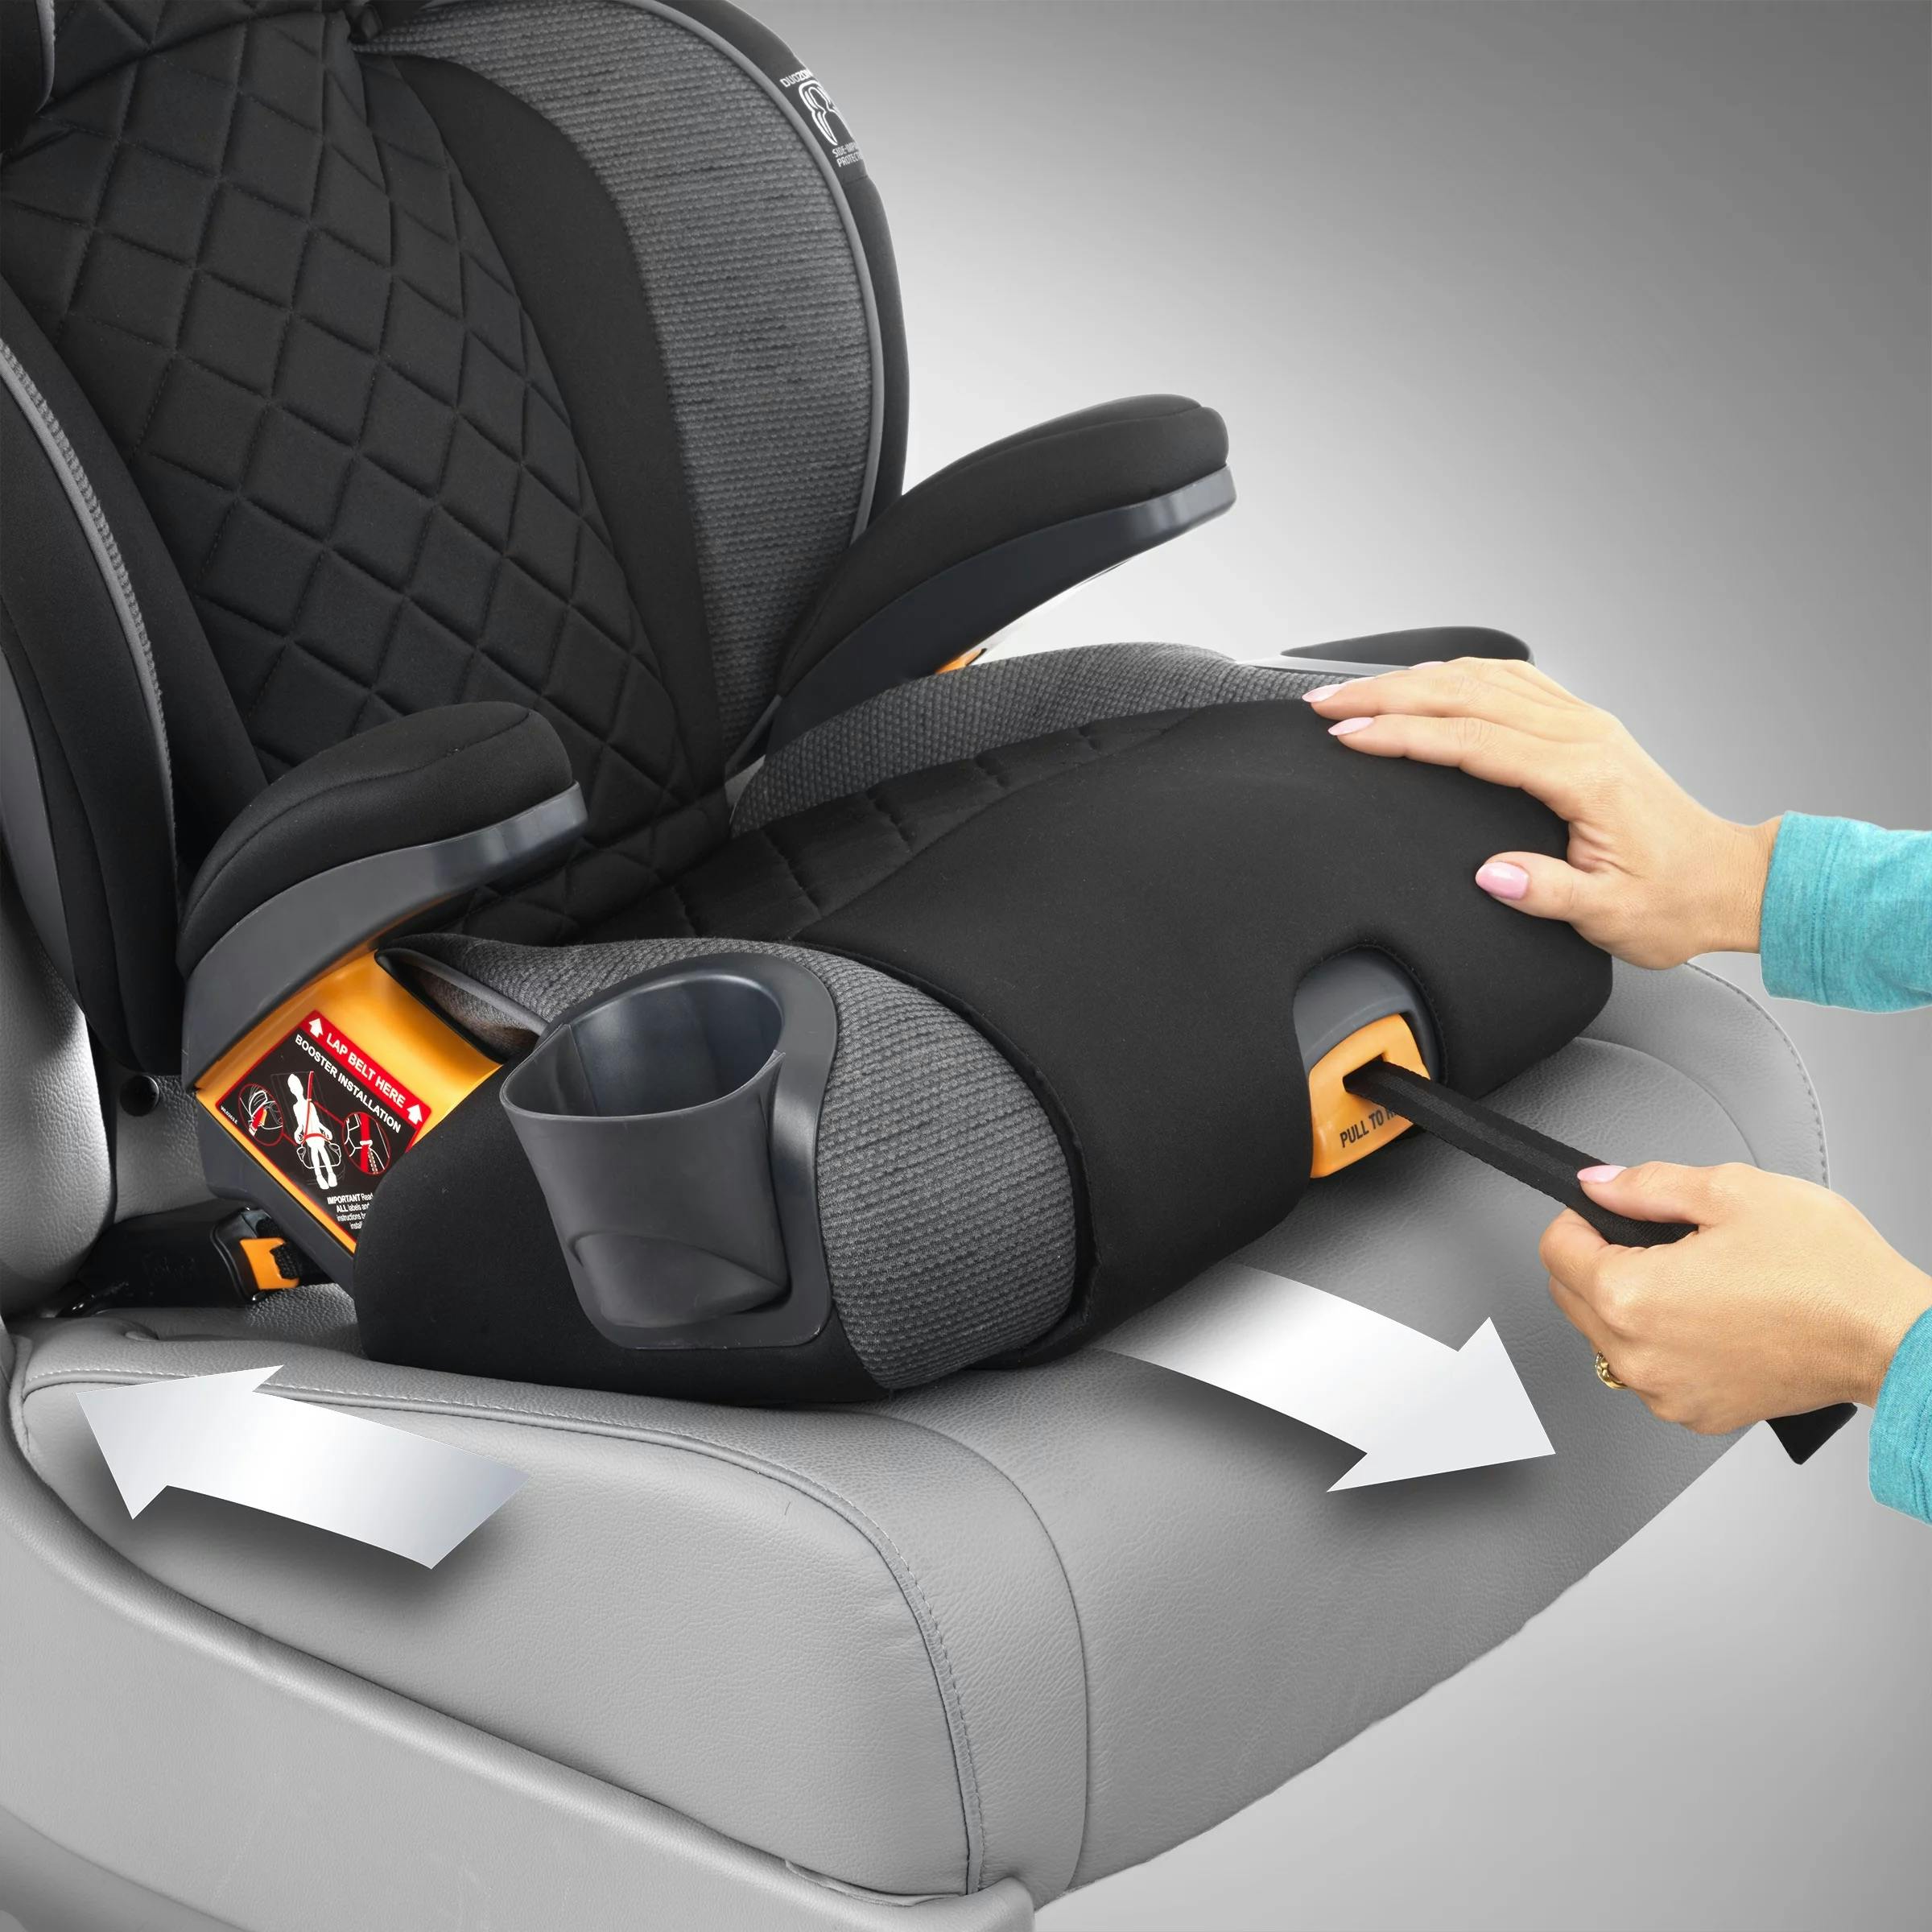 Easily Get $25 - $50 in the Chicco Booster Seat Settlement